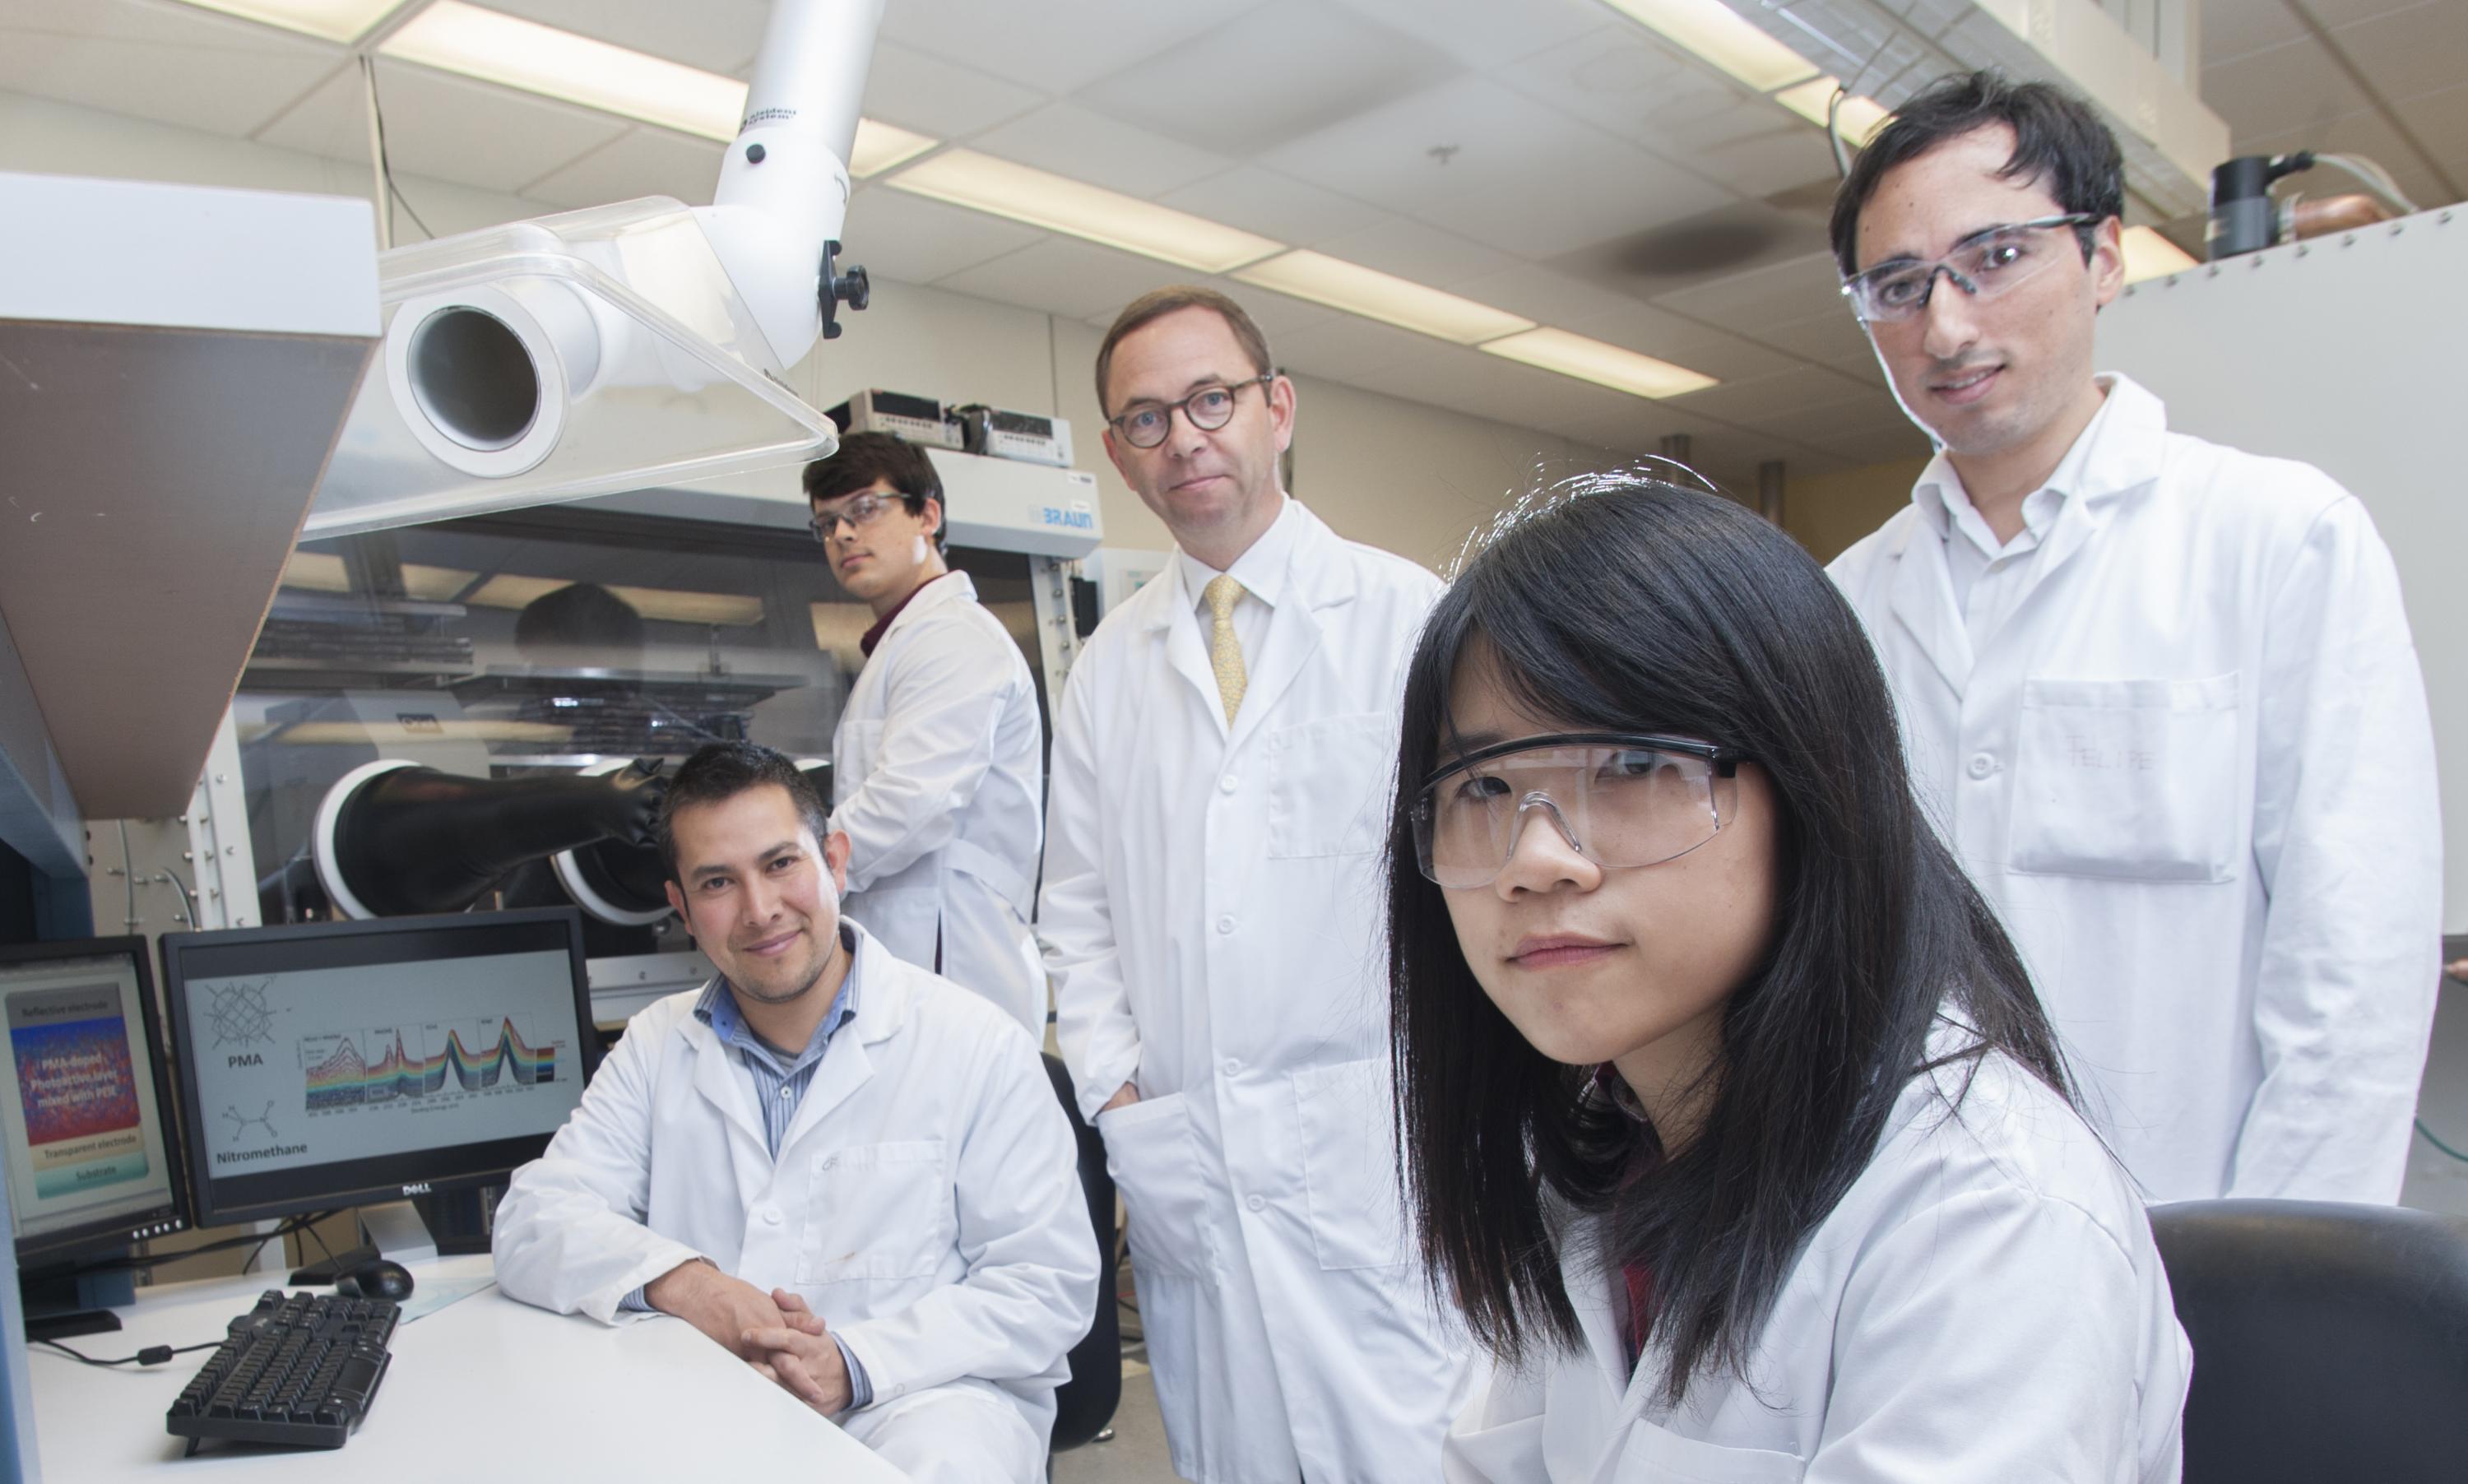 The leading team of scientists at Georgia Tech that developed the new solution-based electrical doping technique for organic semiconductors. Shown are (l-r) senior research scientist Canek Fuentes-Hernandez, graduate student Vladimir Kolesov, professor Bernard Kippelen, and graduate students Wen-Fang Chou and Felipe Larrain. (Credit: Christopher Moore, Georgia Tech)